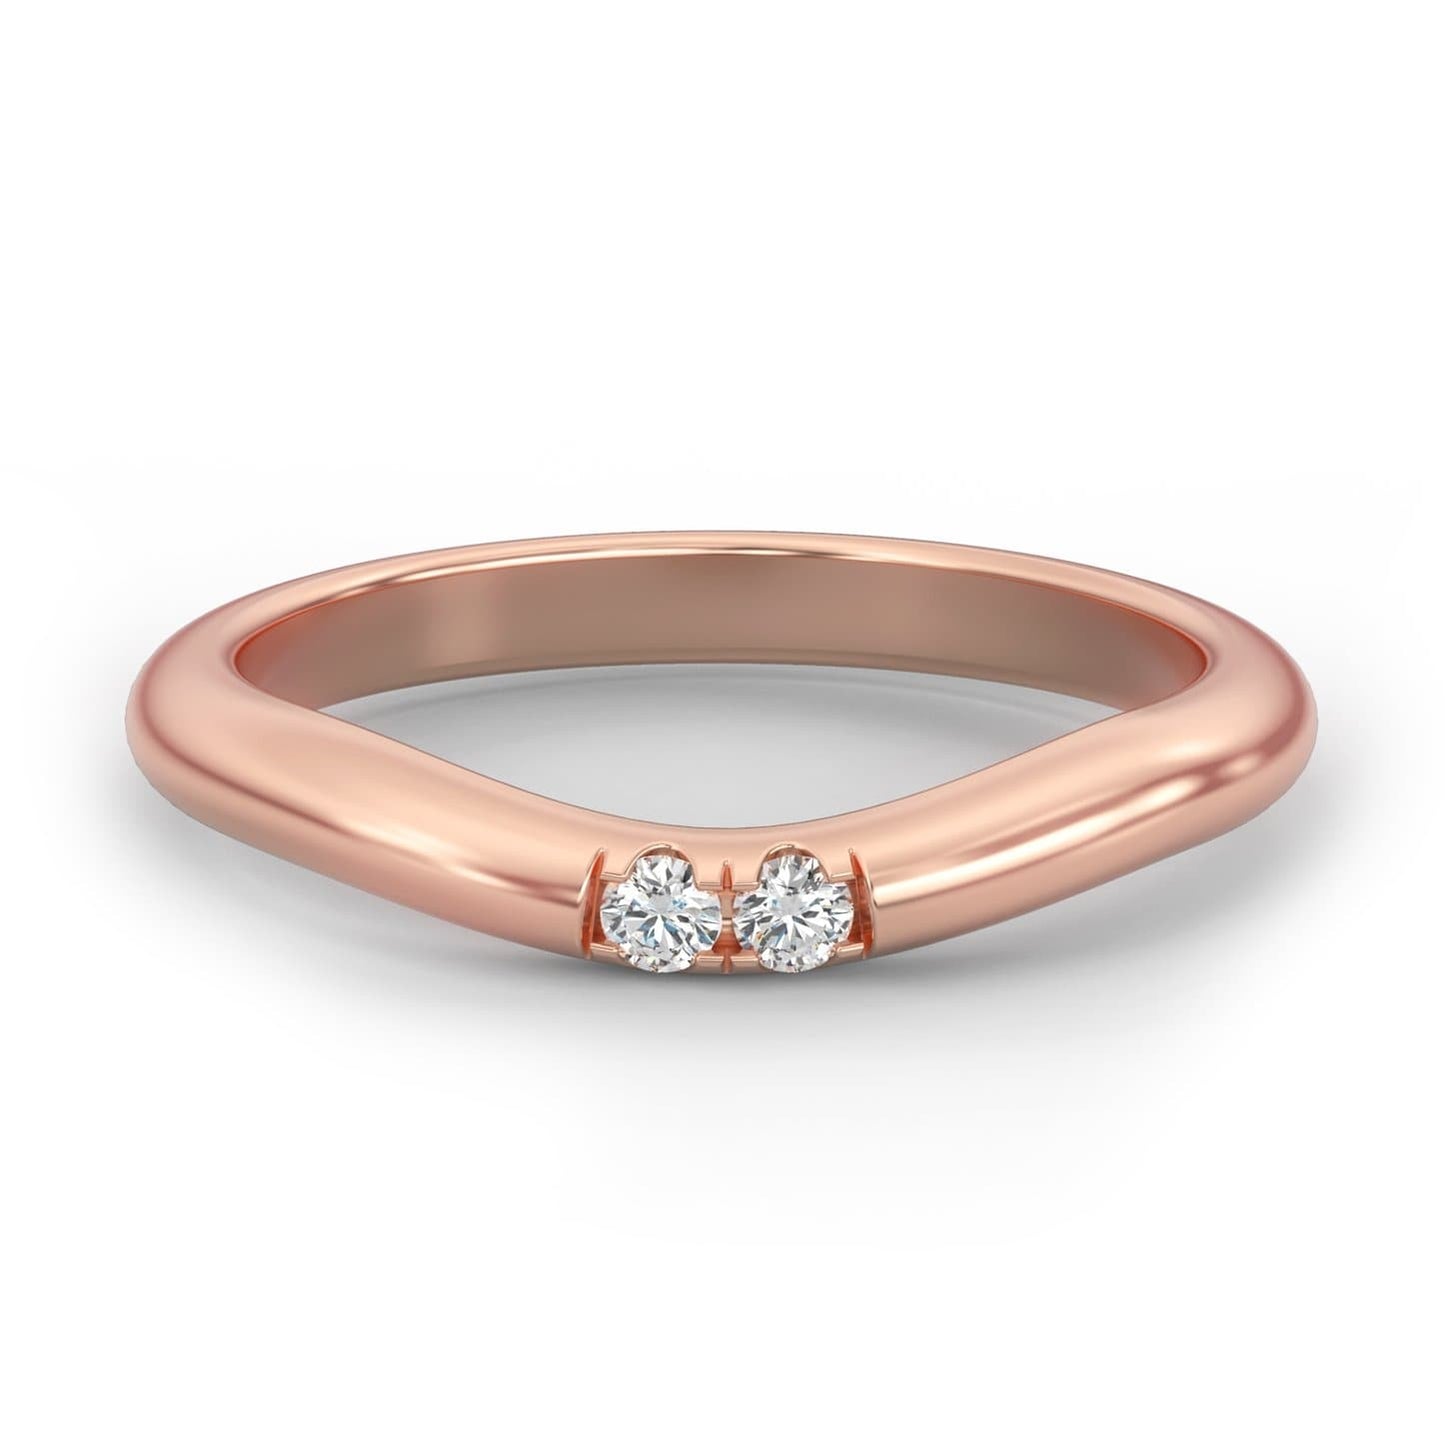 Contour Petite Curved Diamond Ring in 14k Gold